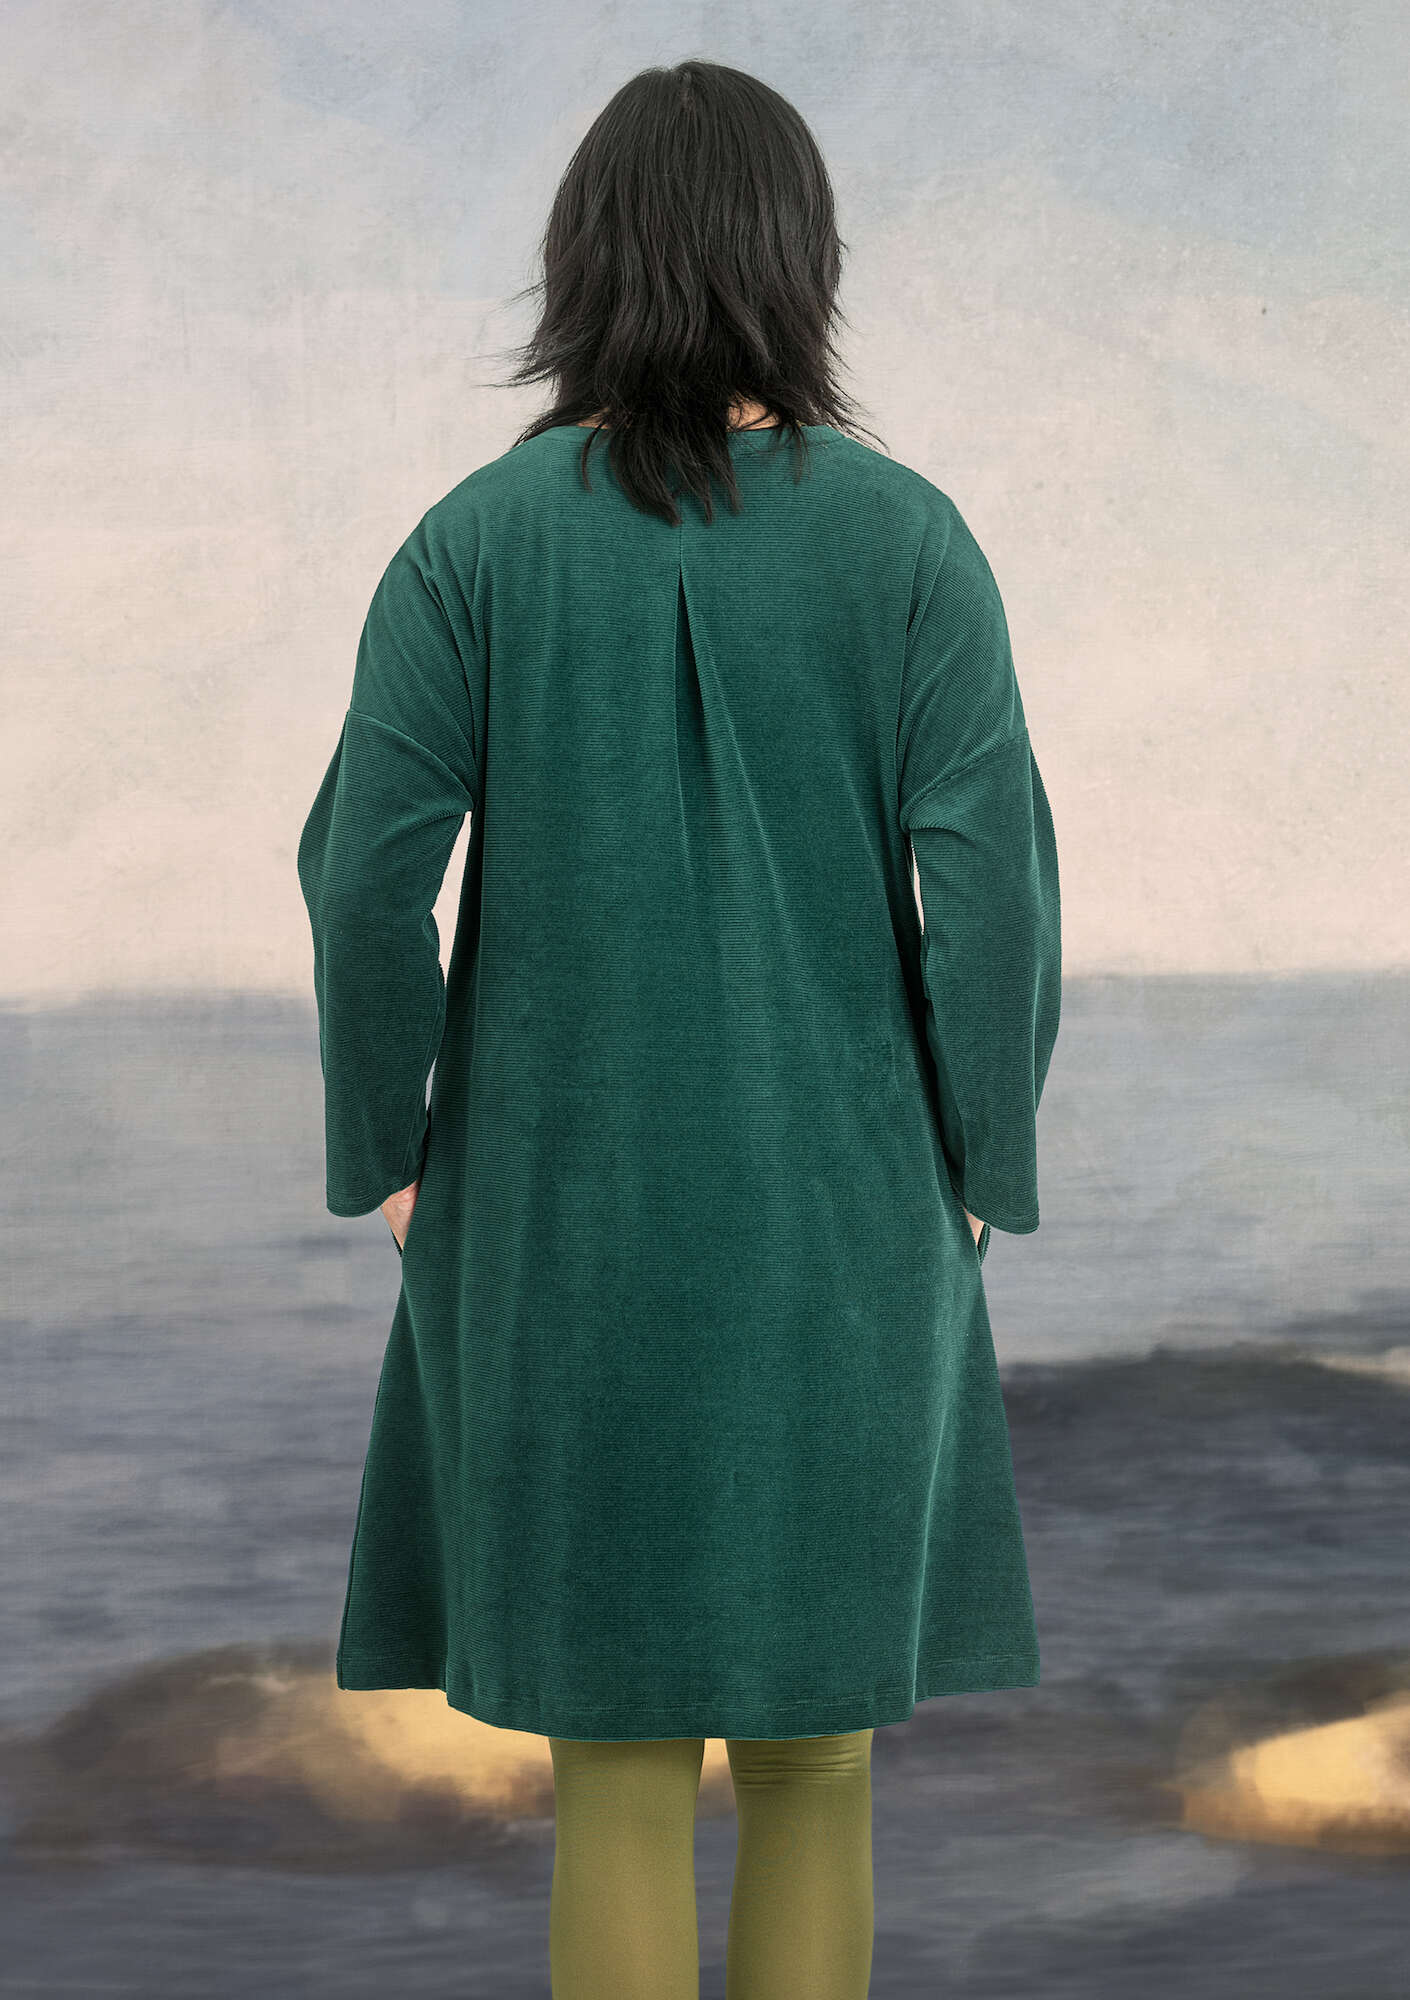 Velour dress in organic cotton/recycled polyester/spandex bottle green